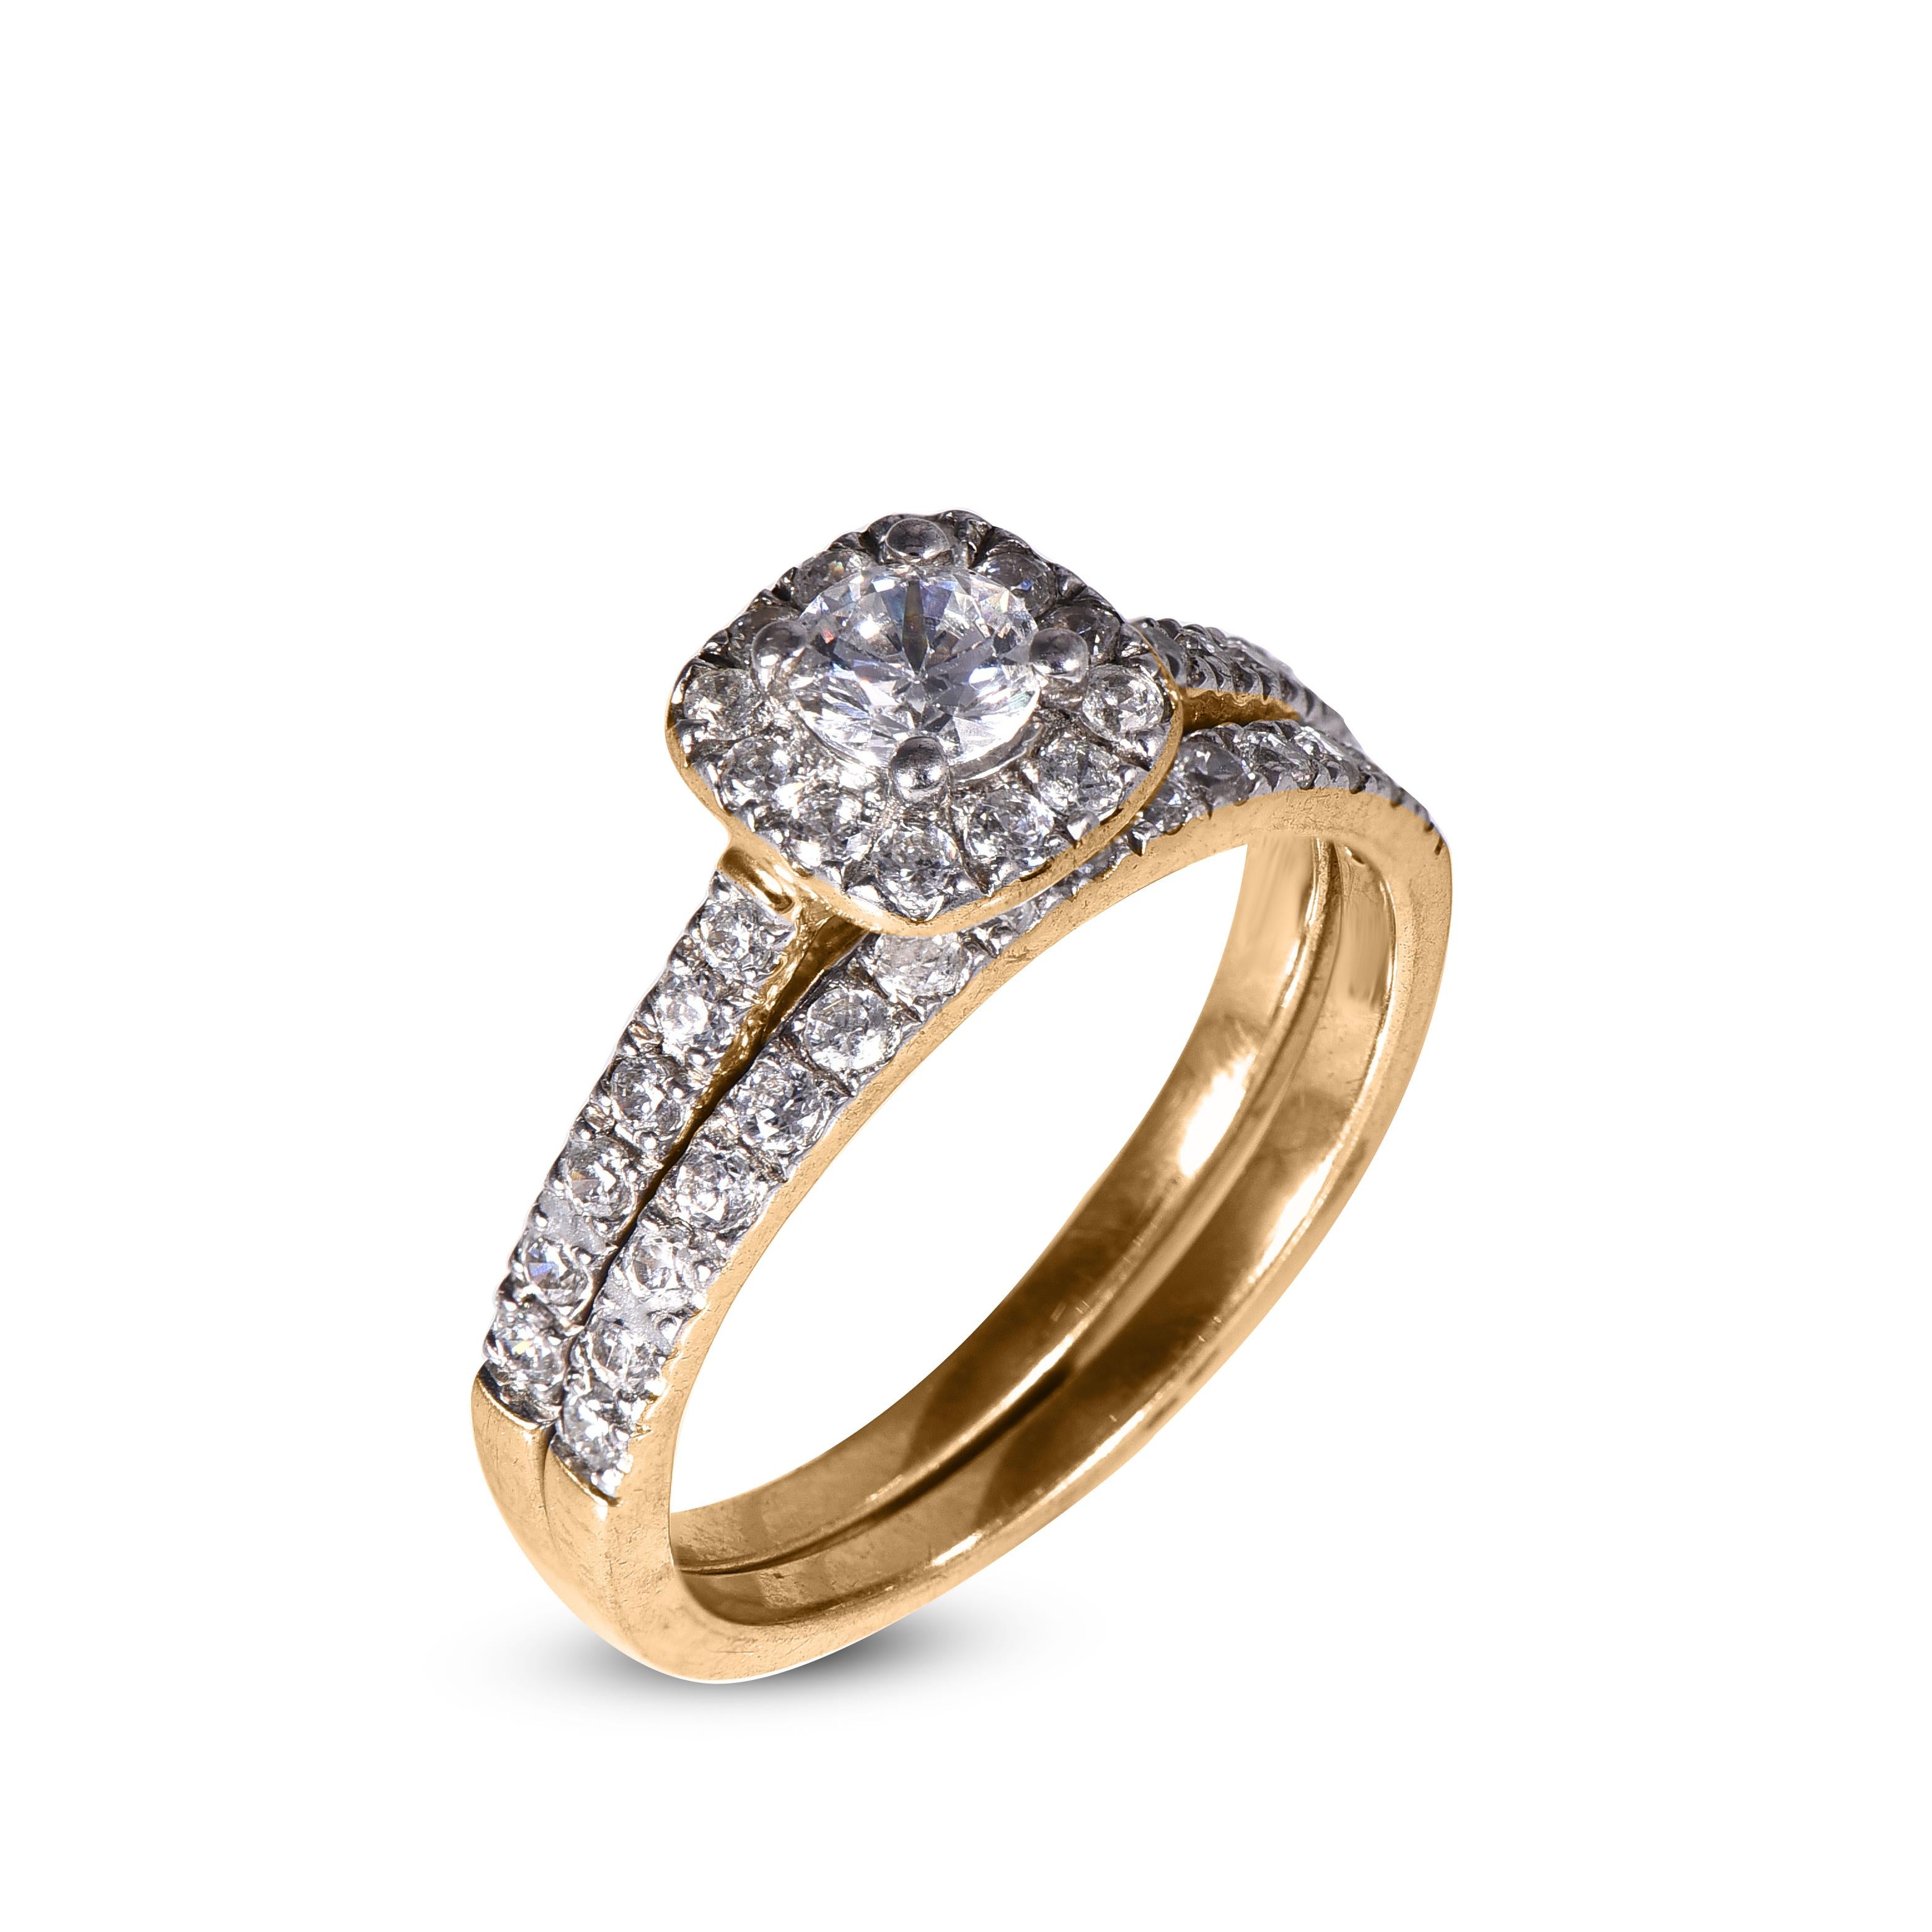 Exquisite 18K Yellow gold Bridal set ring with 0.33 ct centre stone and 0.67 ct on Diamond Frame and engagement band . Expertly Crafted of sparkling 43 round brilliant diamonds set in prong setting, G-H color SI1-2 clarity in high polish finish,